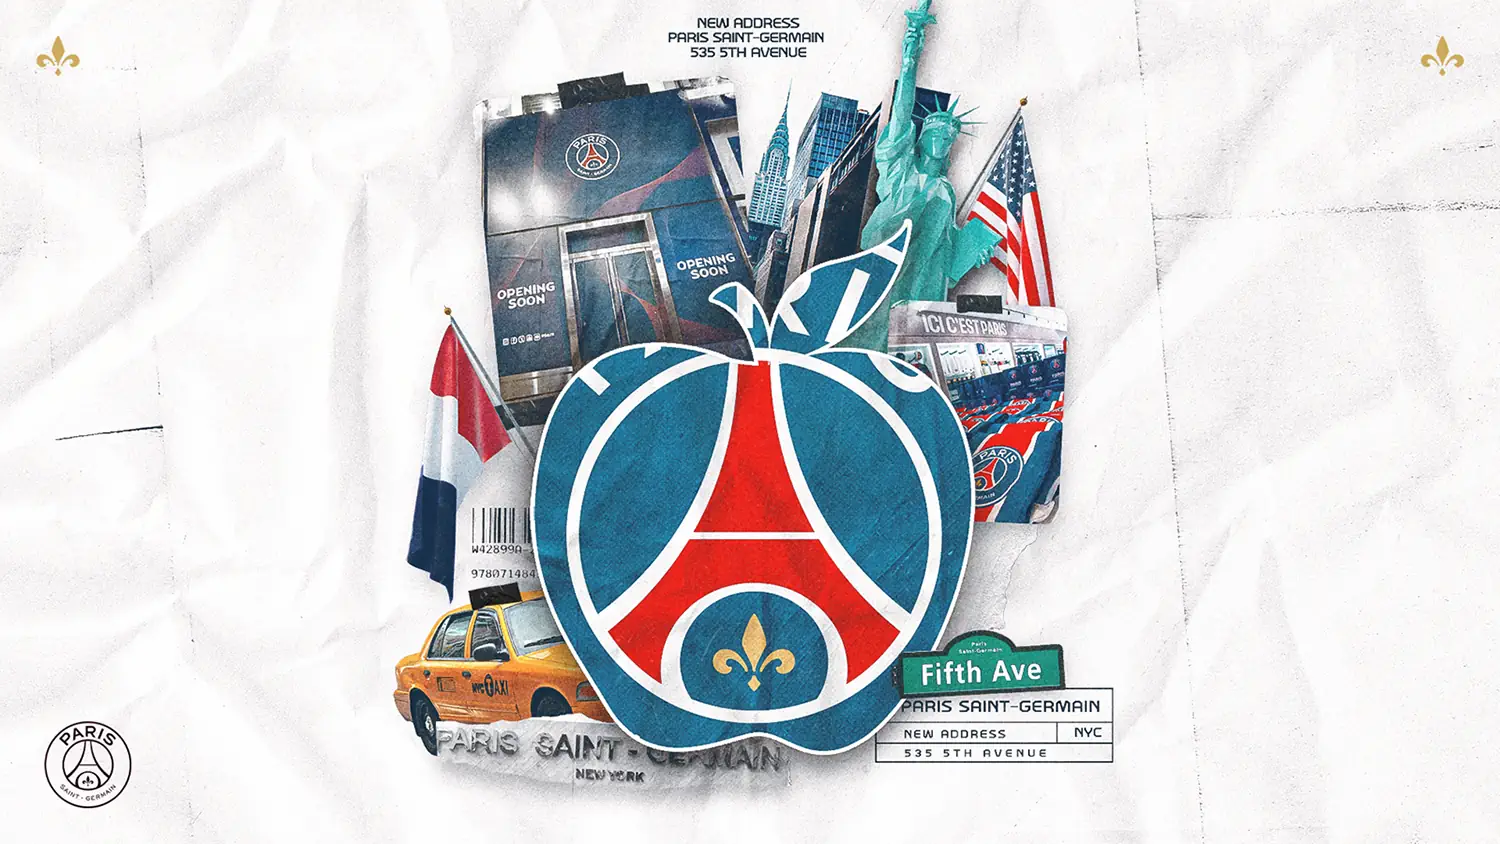 Paris Saint-Germain to open world's largest store on New York's Fifth Avenue